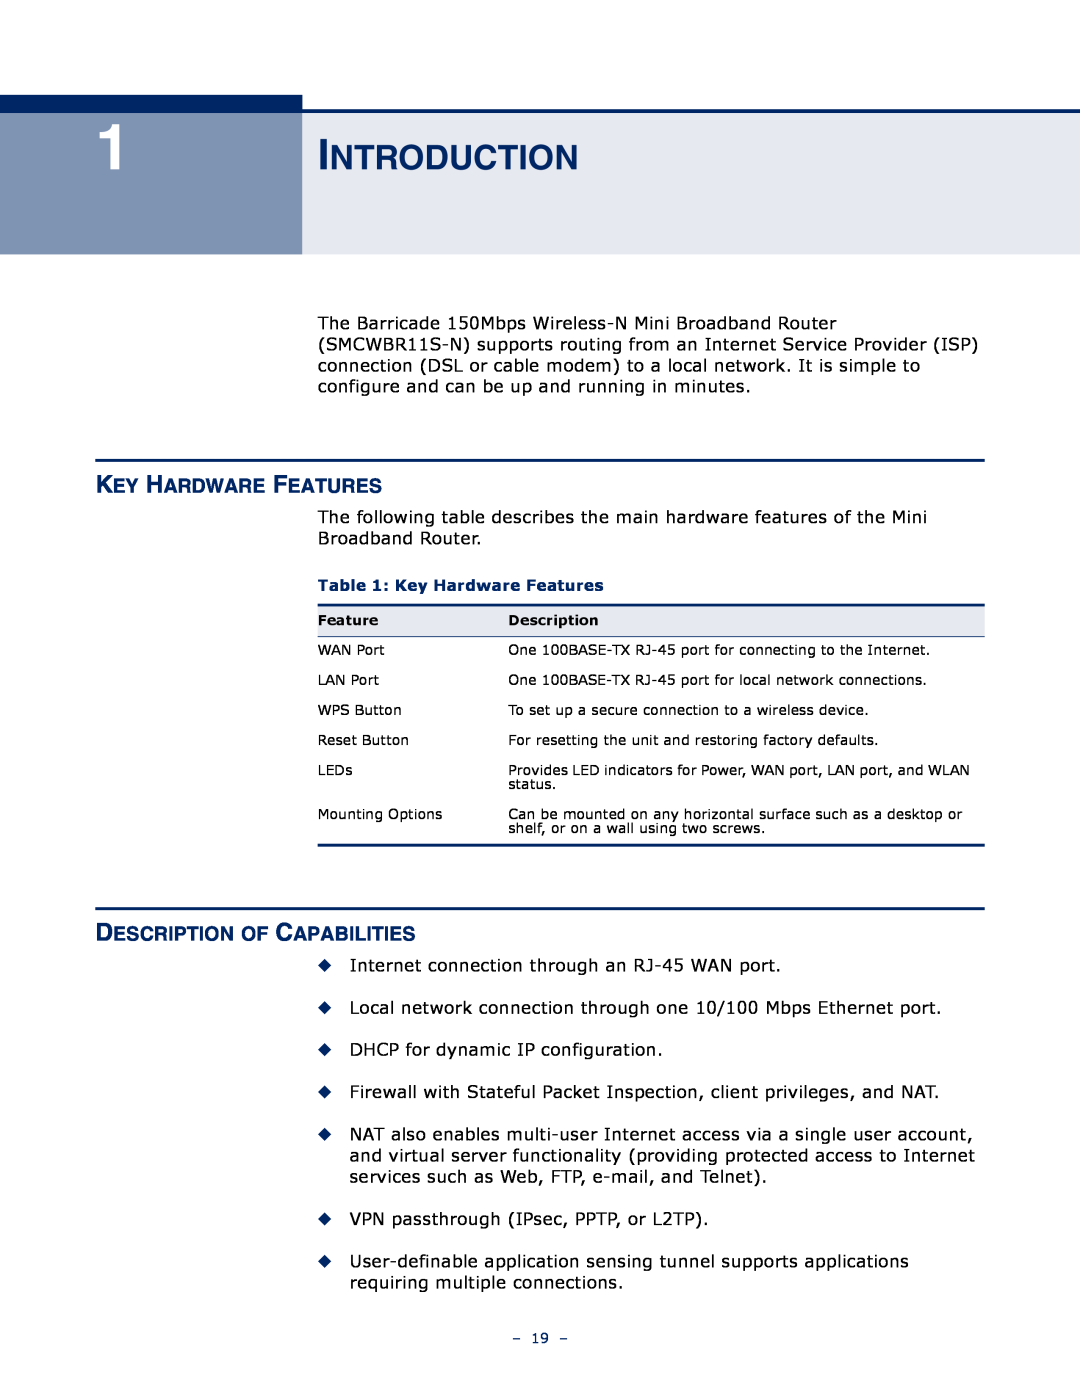 SMC Networks SMCWBR11S-N manual Introduction, Key Hardware Features, Description Of Capabilities 